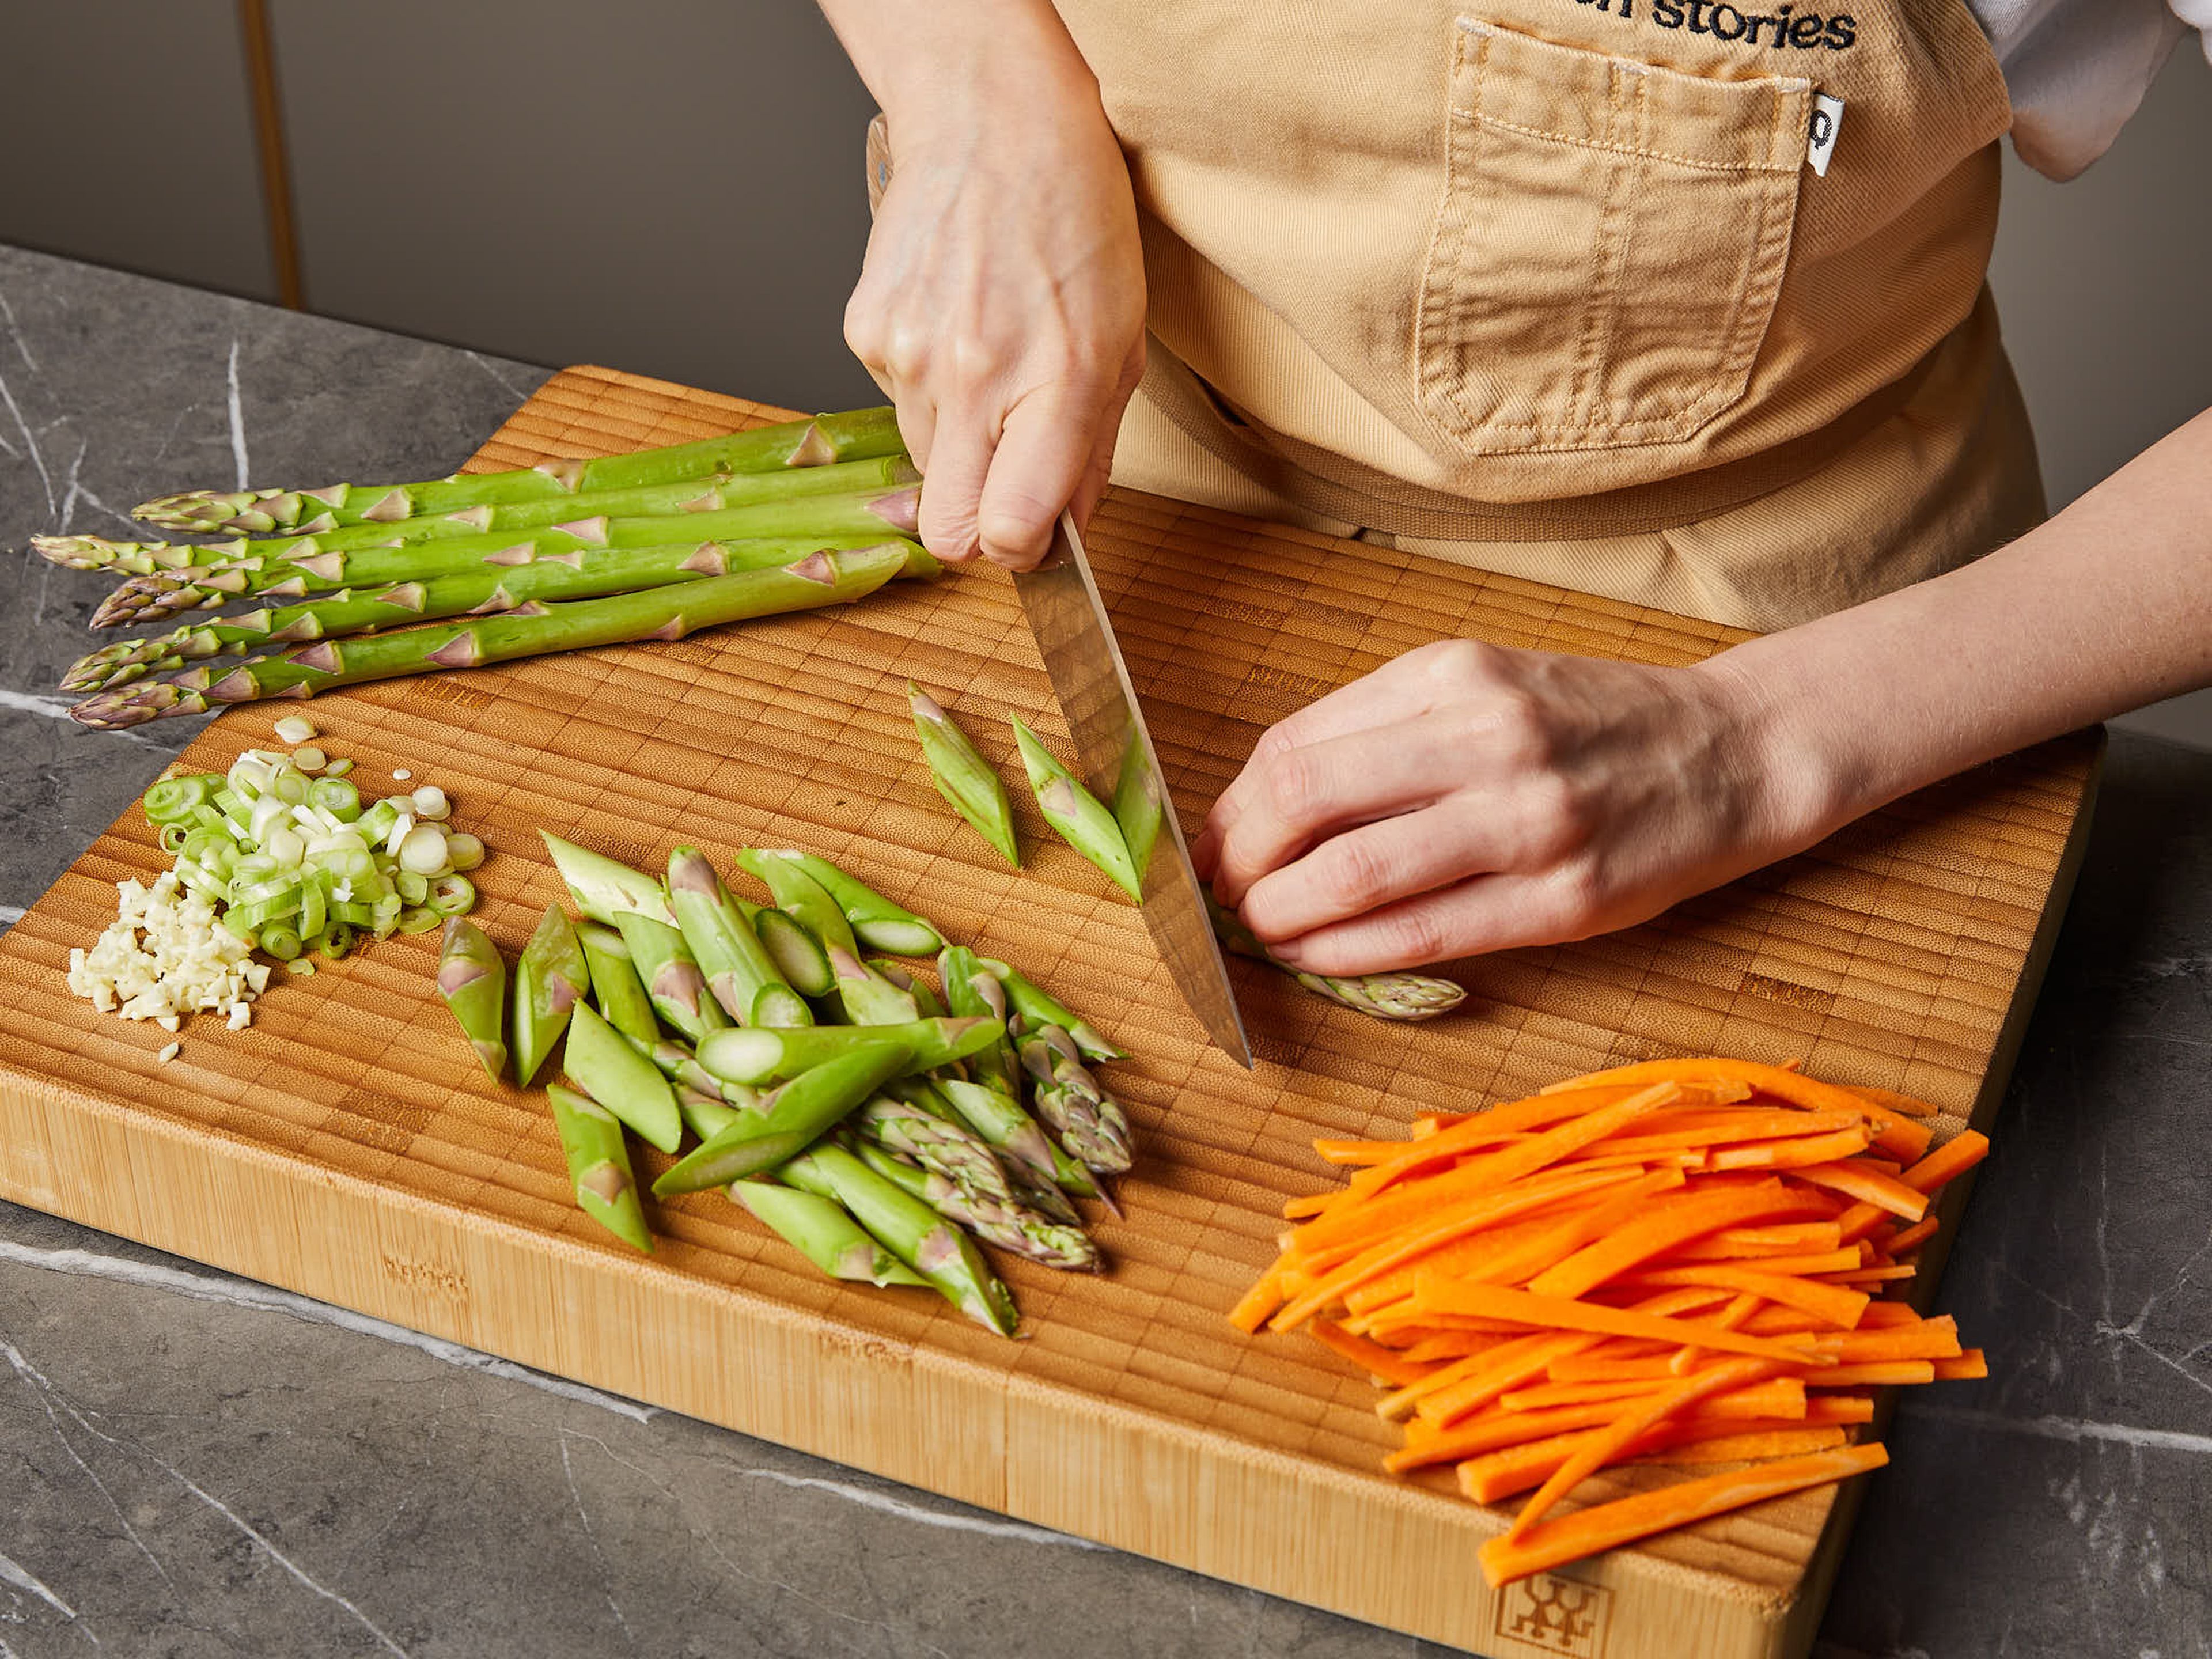 Cut off the woody bottoms of the asparagus and cut the remaining pieces diagonally into bite sized pieces. Peel the carrot and cut into thin strips. Finely chop the garlic. Slice the white part of the scallion to fine rings and set aside the green part, thinly slicing them for garnishing. Juice the lemon.